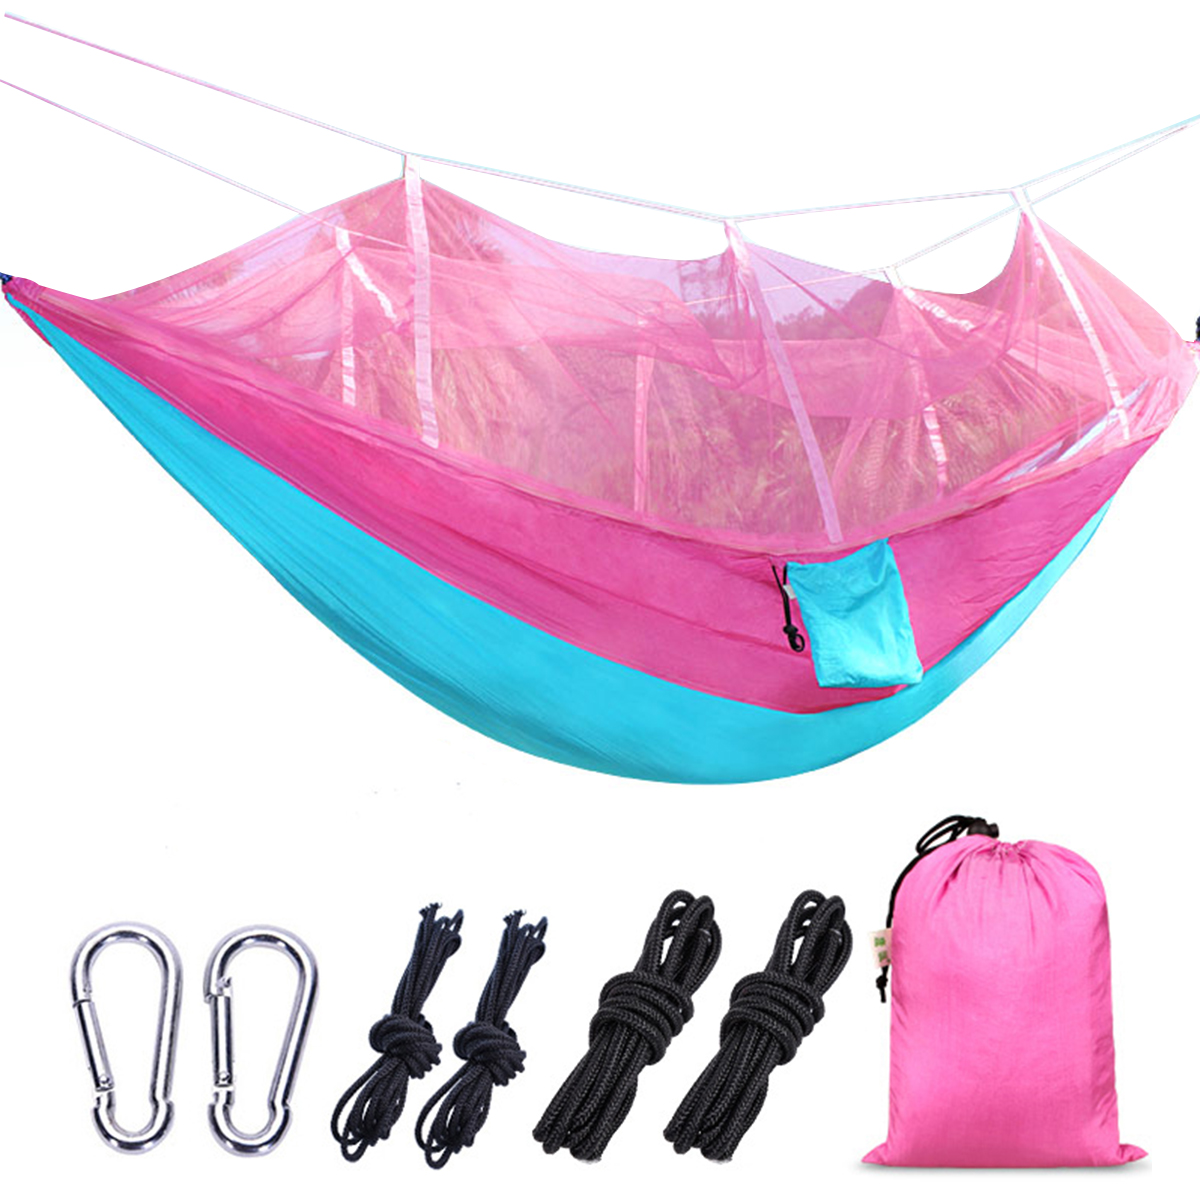 IPReereg-260140CM-With-Mosquito-Net-Portable-Travel-Hammock-Comfortable-Hommock-Camping-Bed-Fits-2-P-1726267-9